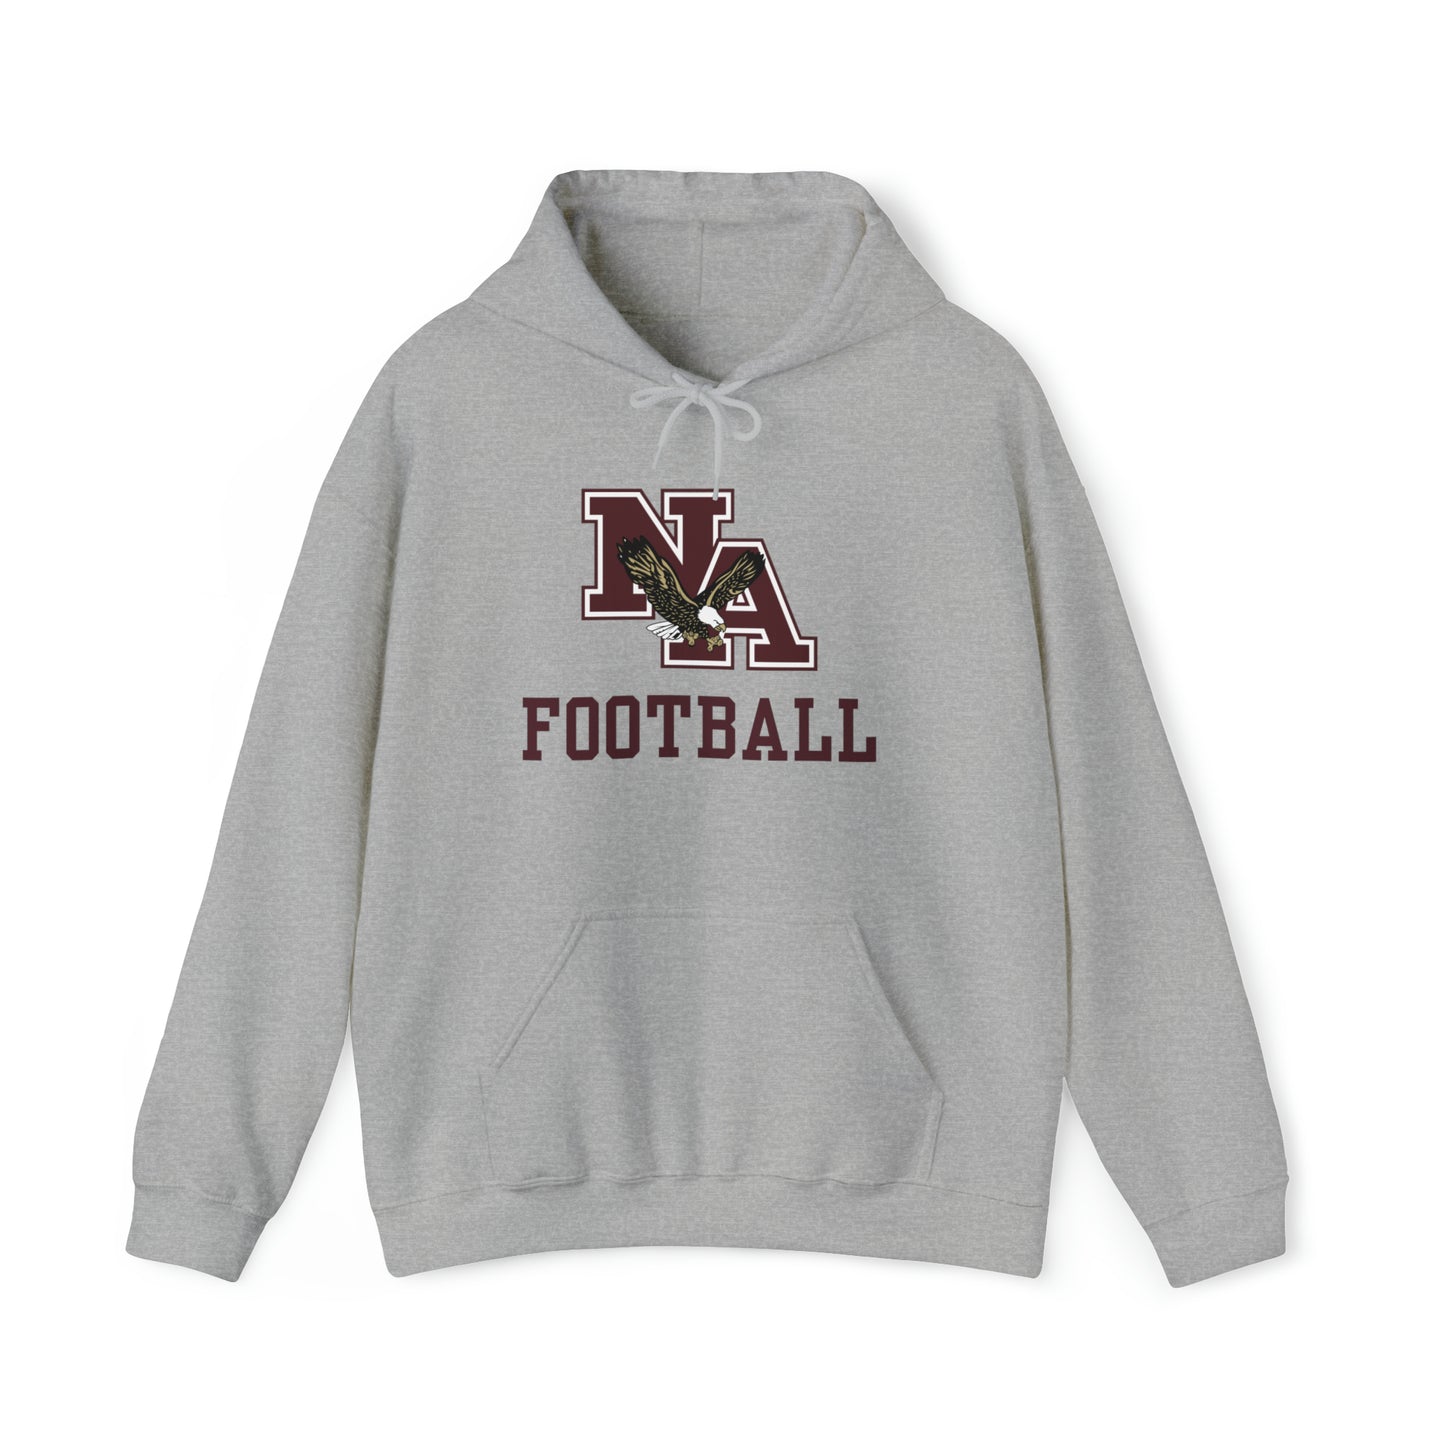 Adult Unisex Football Classic Logo Graphic Hoodie - New Albany Eagles